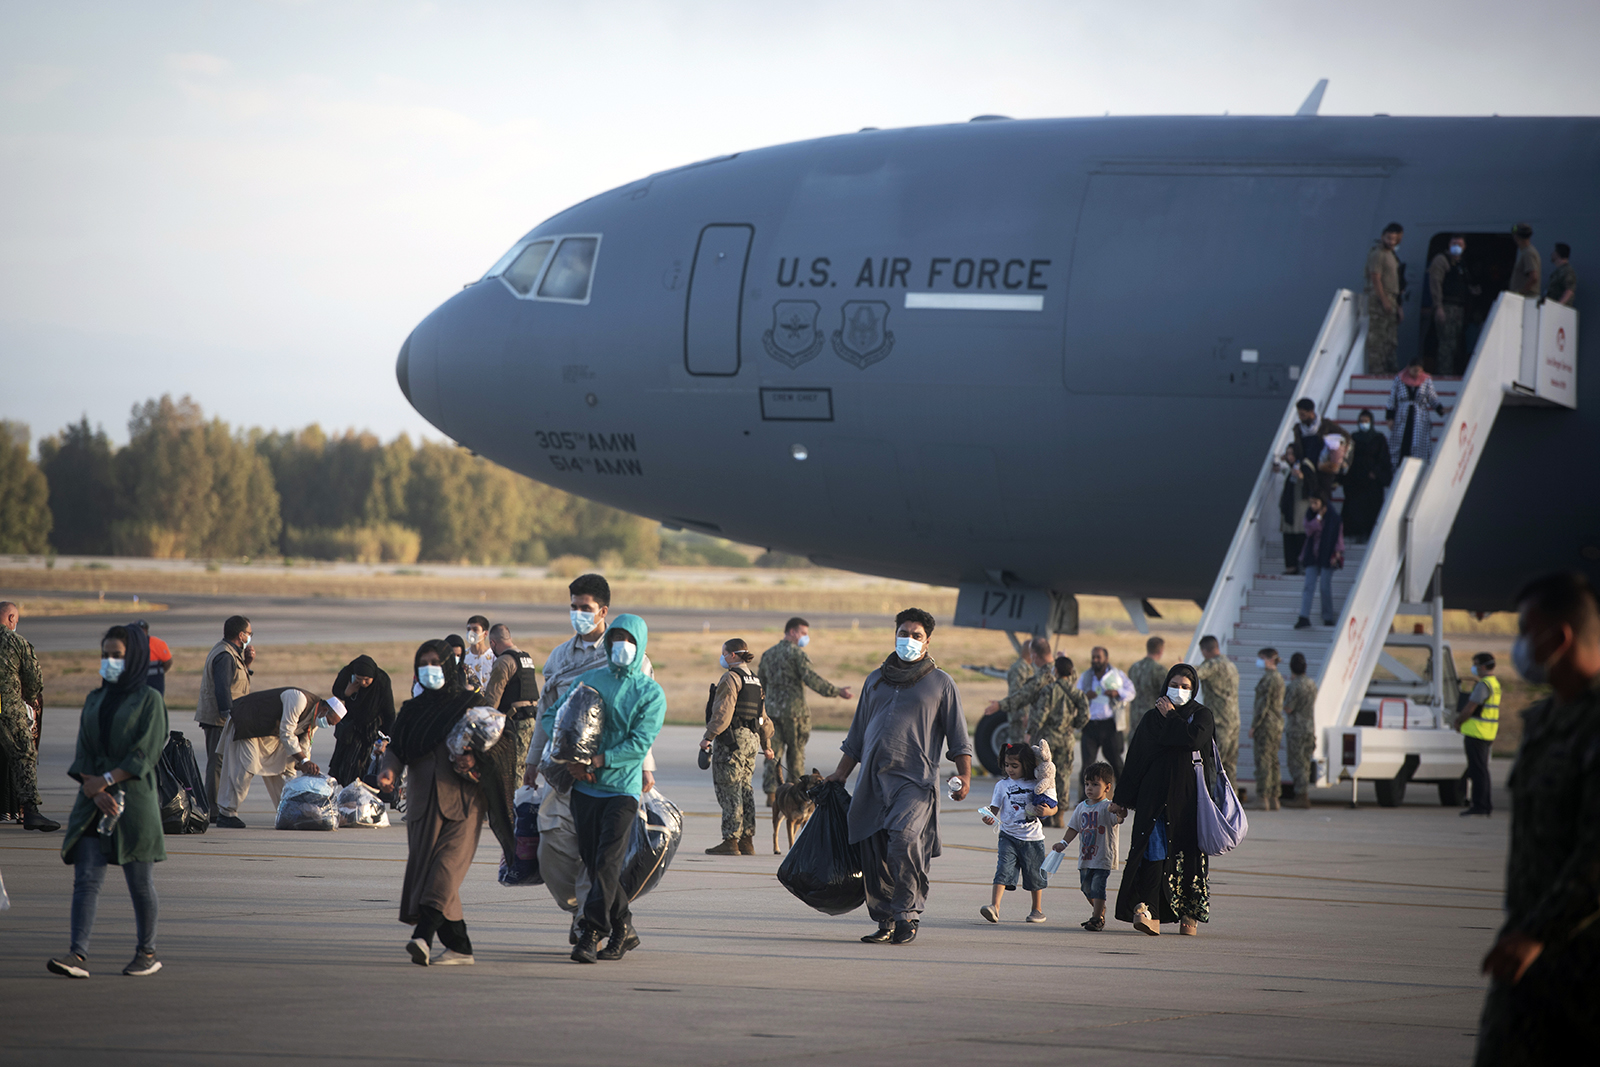 Evacuees from Afghanistan disembark from a U.S. Air Force plane at the naval station in Rota, southern Spain, on Aug. 31, 2021. The United States completed its withdrawal from Afghanistan late Monday, ending America’s longest war. (AP Photo/ Marcos Moreno)